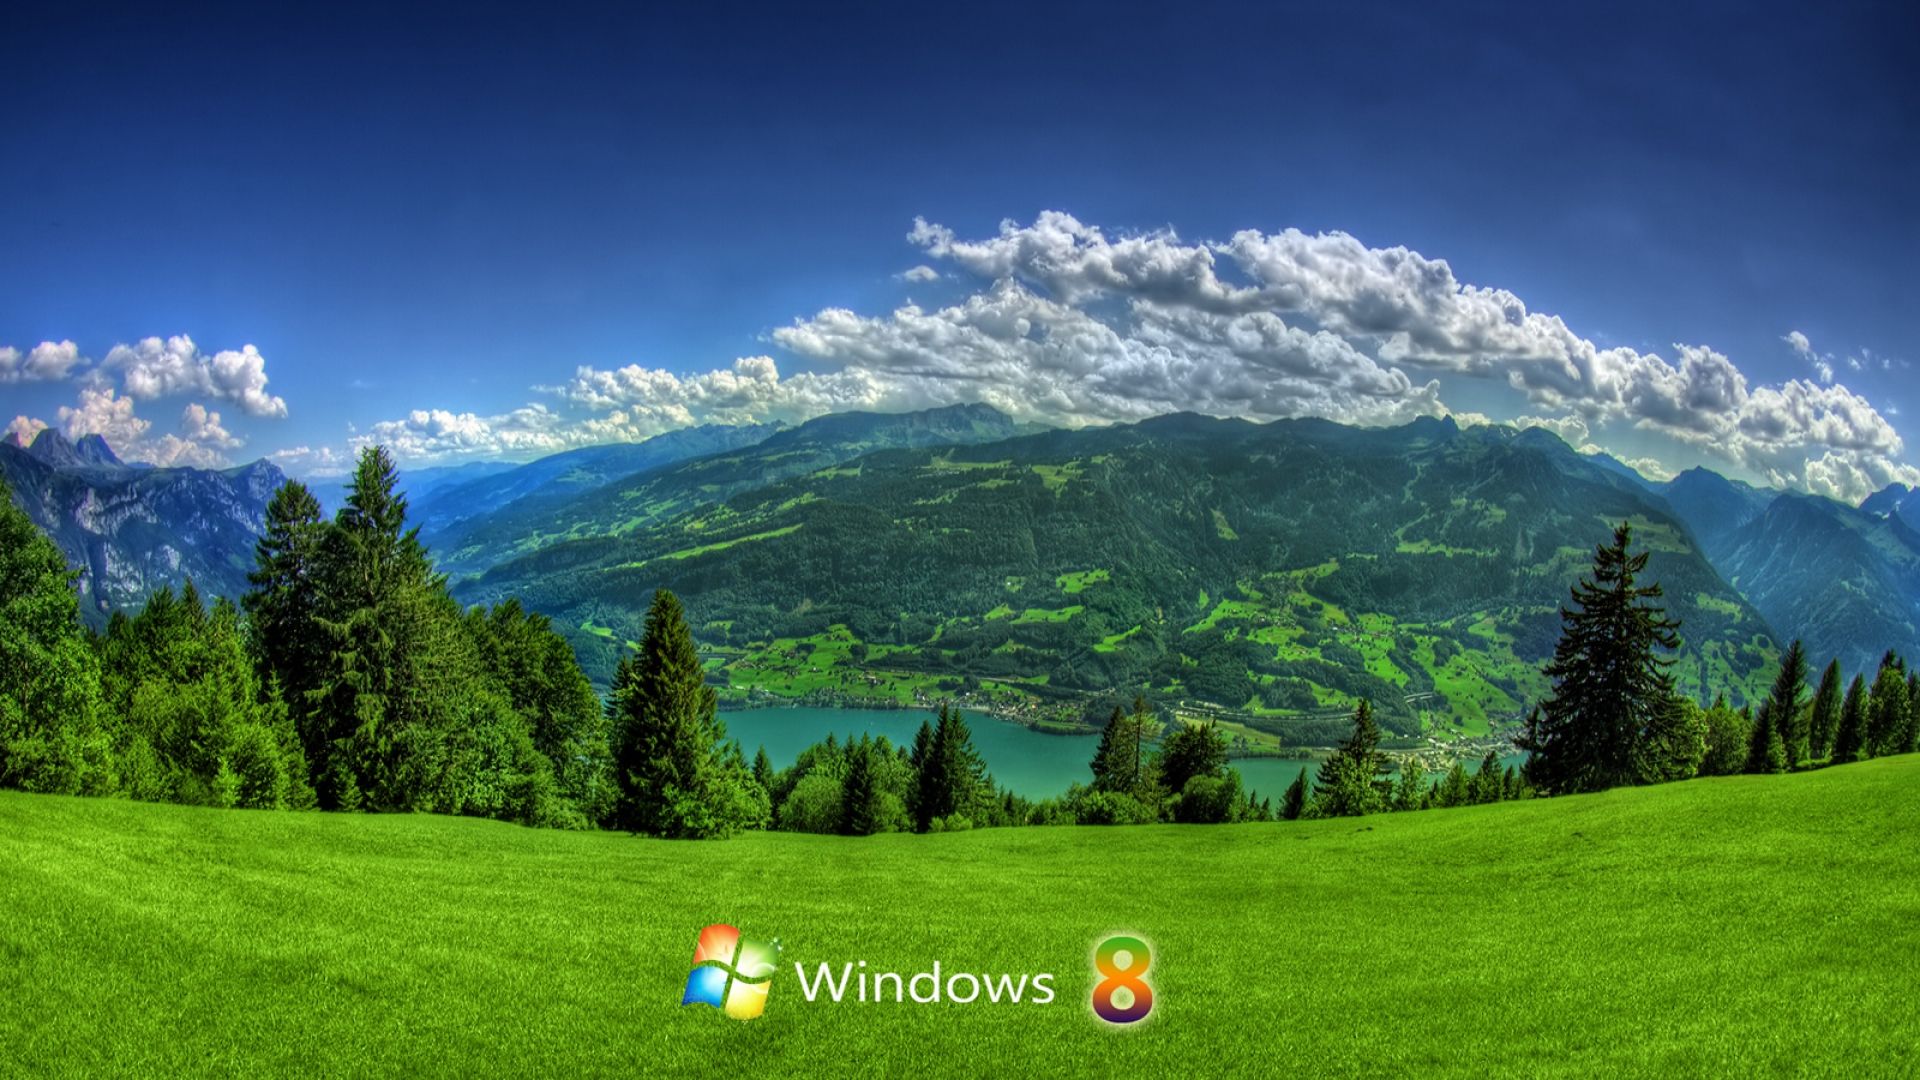 3D Windows 8 wallpapers Full HD Pictures